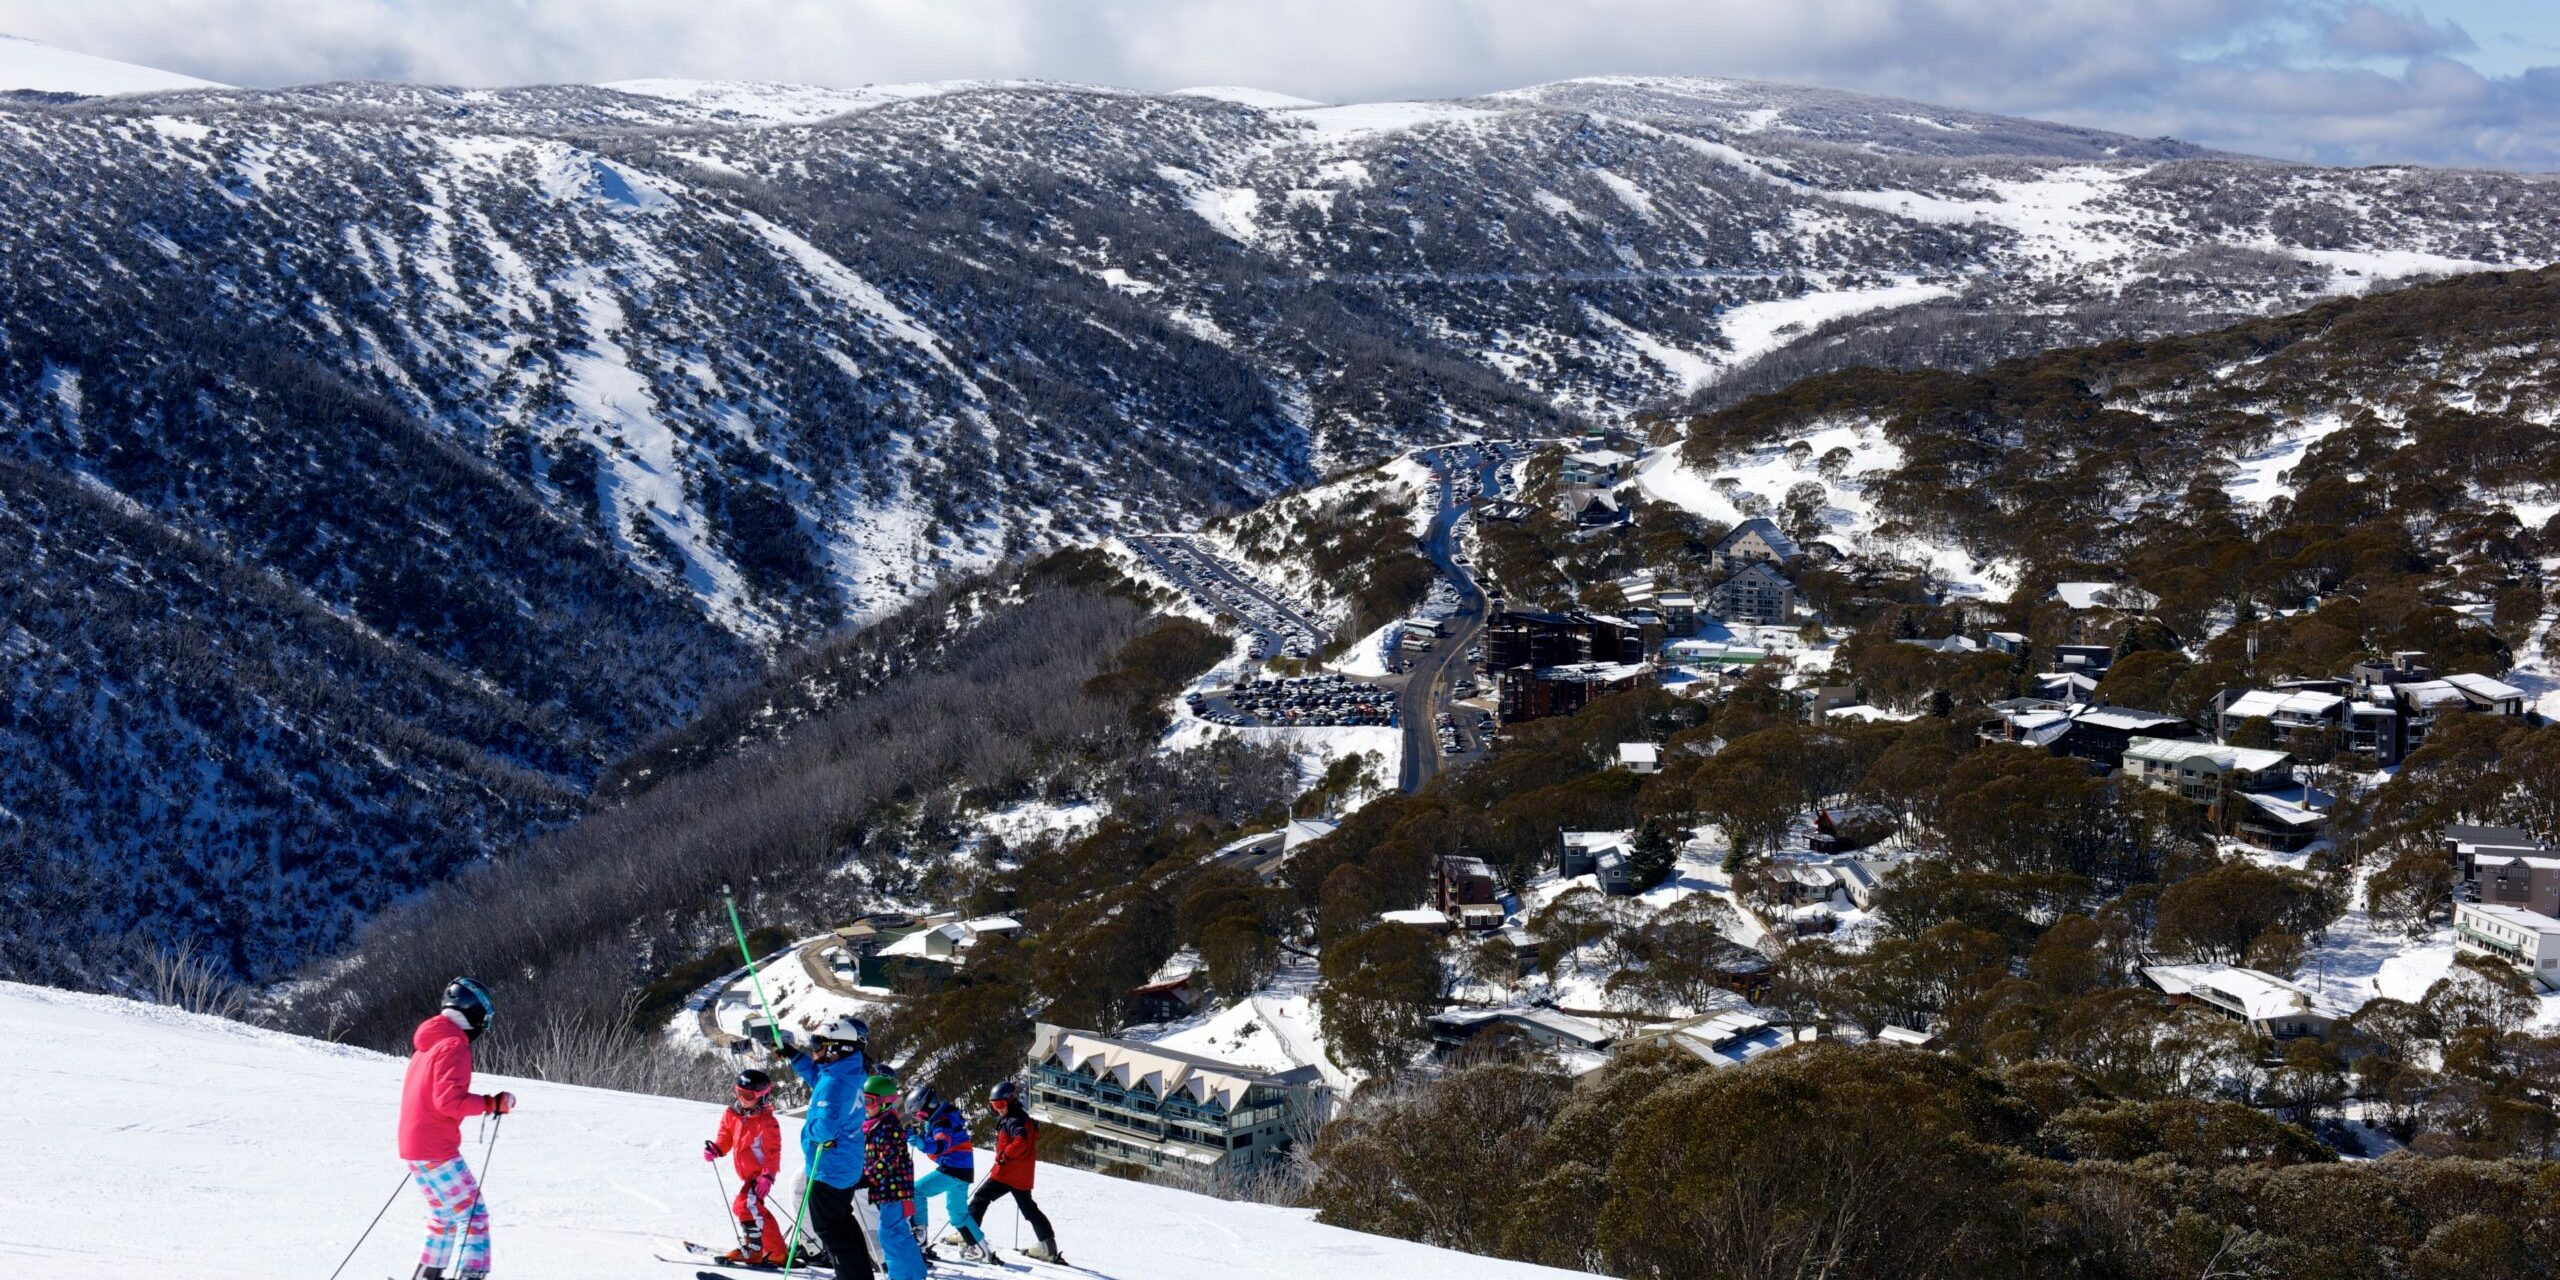 After close to 20cm of new snow this week, Falls Creek is well positioned with just over 5 weeks remaining in the 2015 snow season with a natural base around 100cm &amp; 170cm in snowmaking areas. Students enjoy ski school at  at Falls Creek this week.